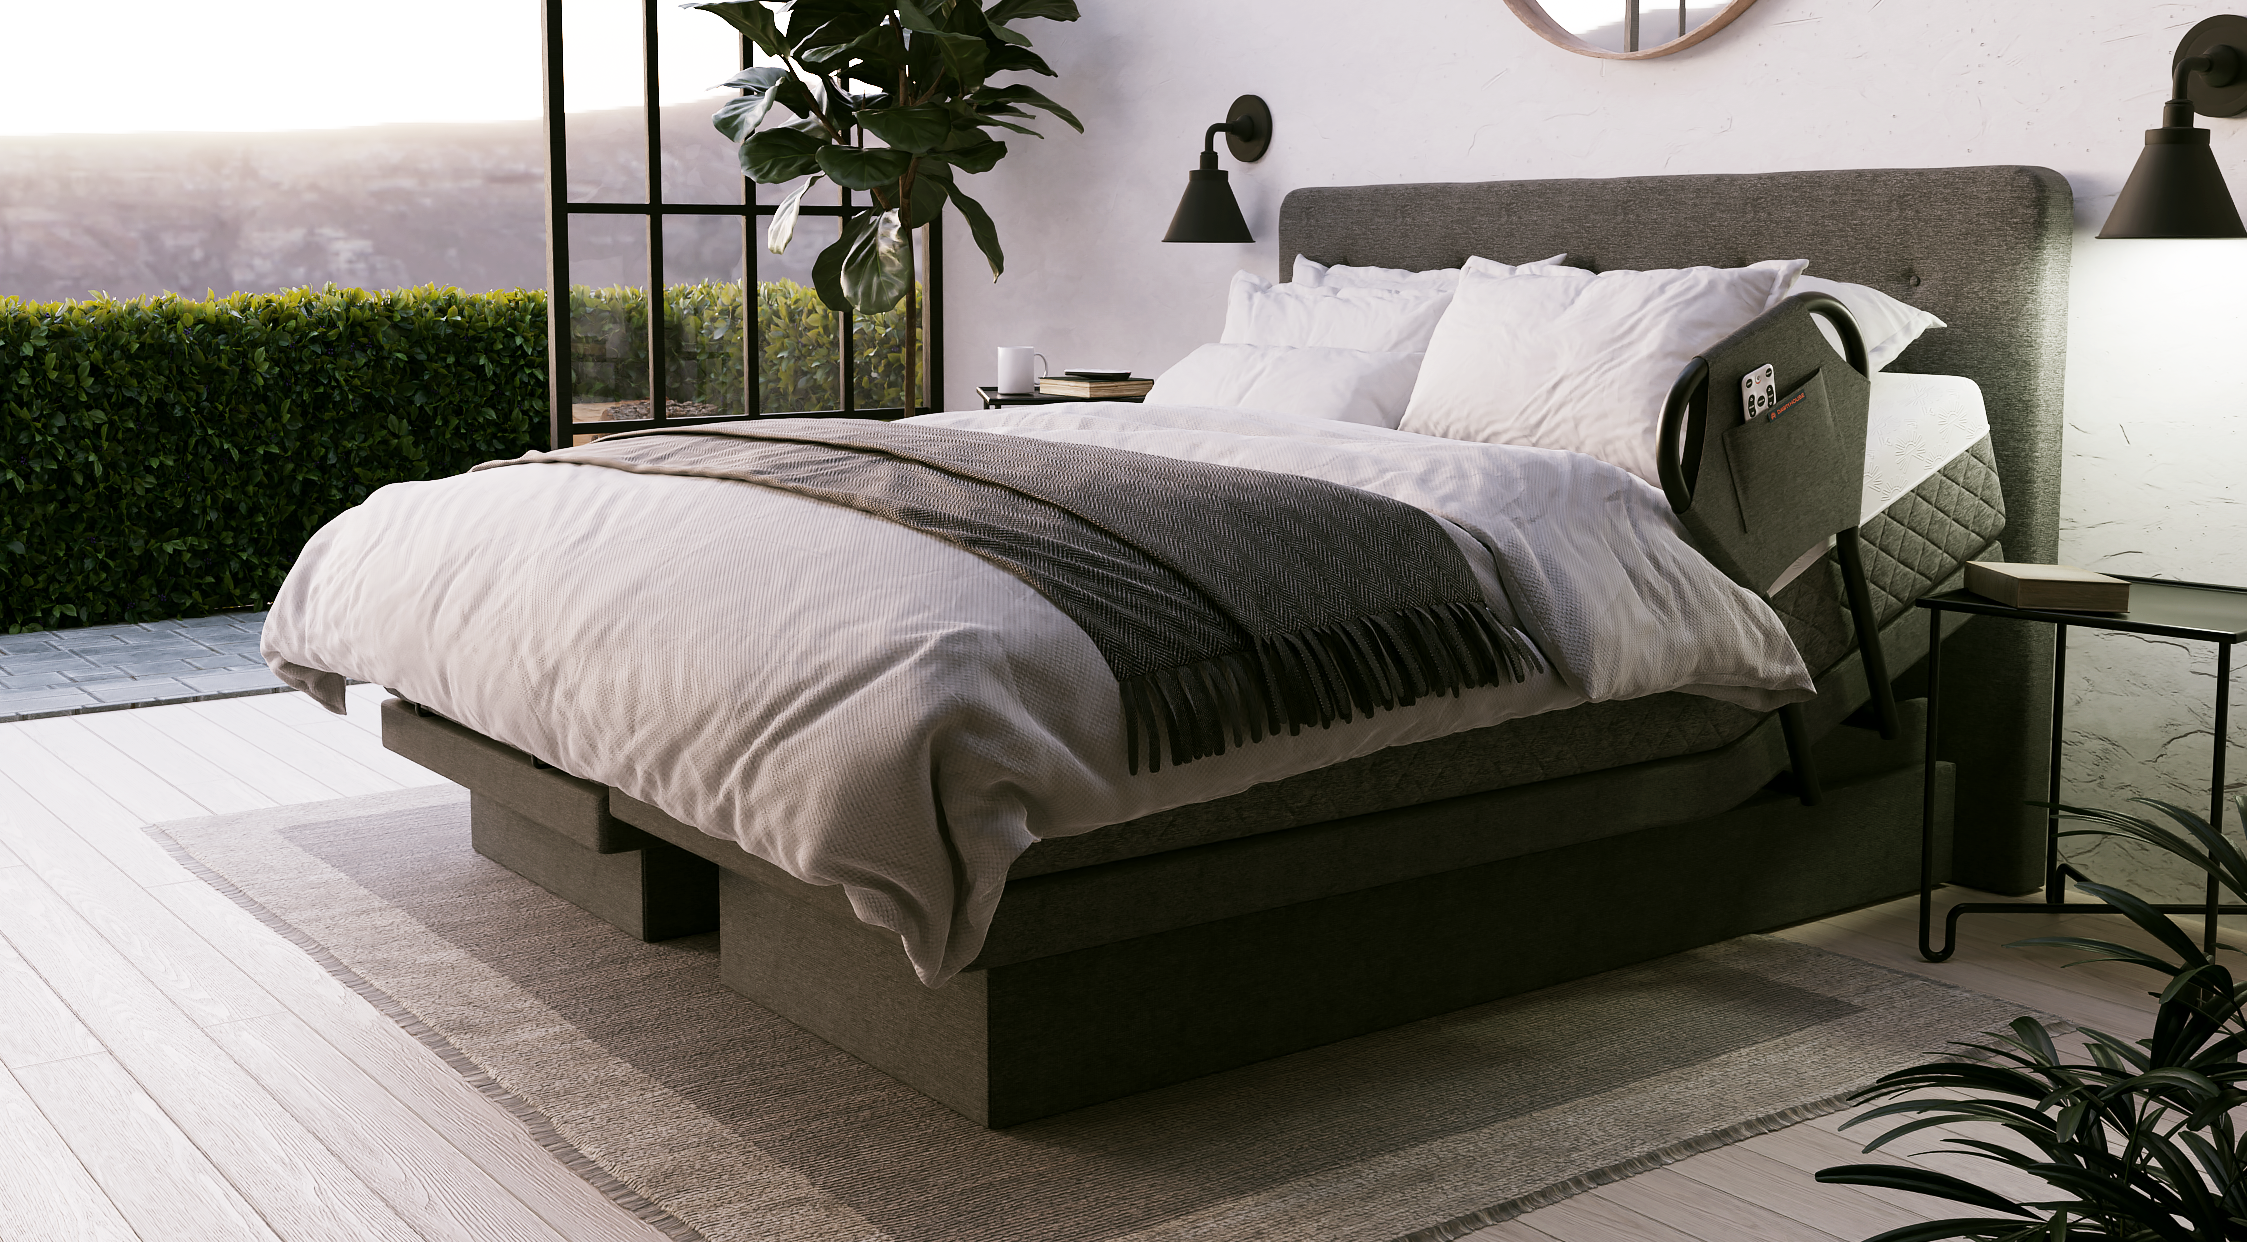 Indio Dawn House Beds